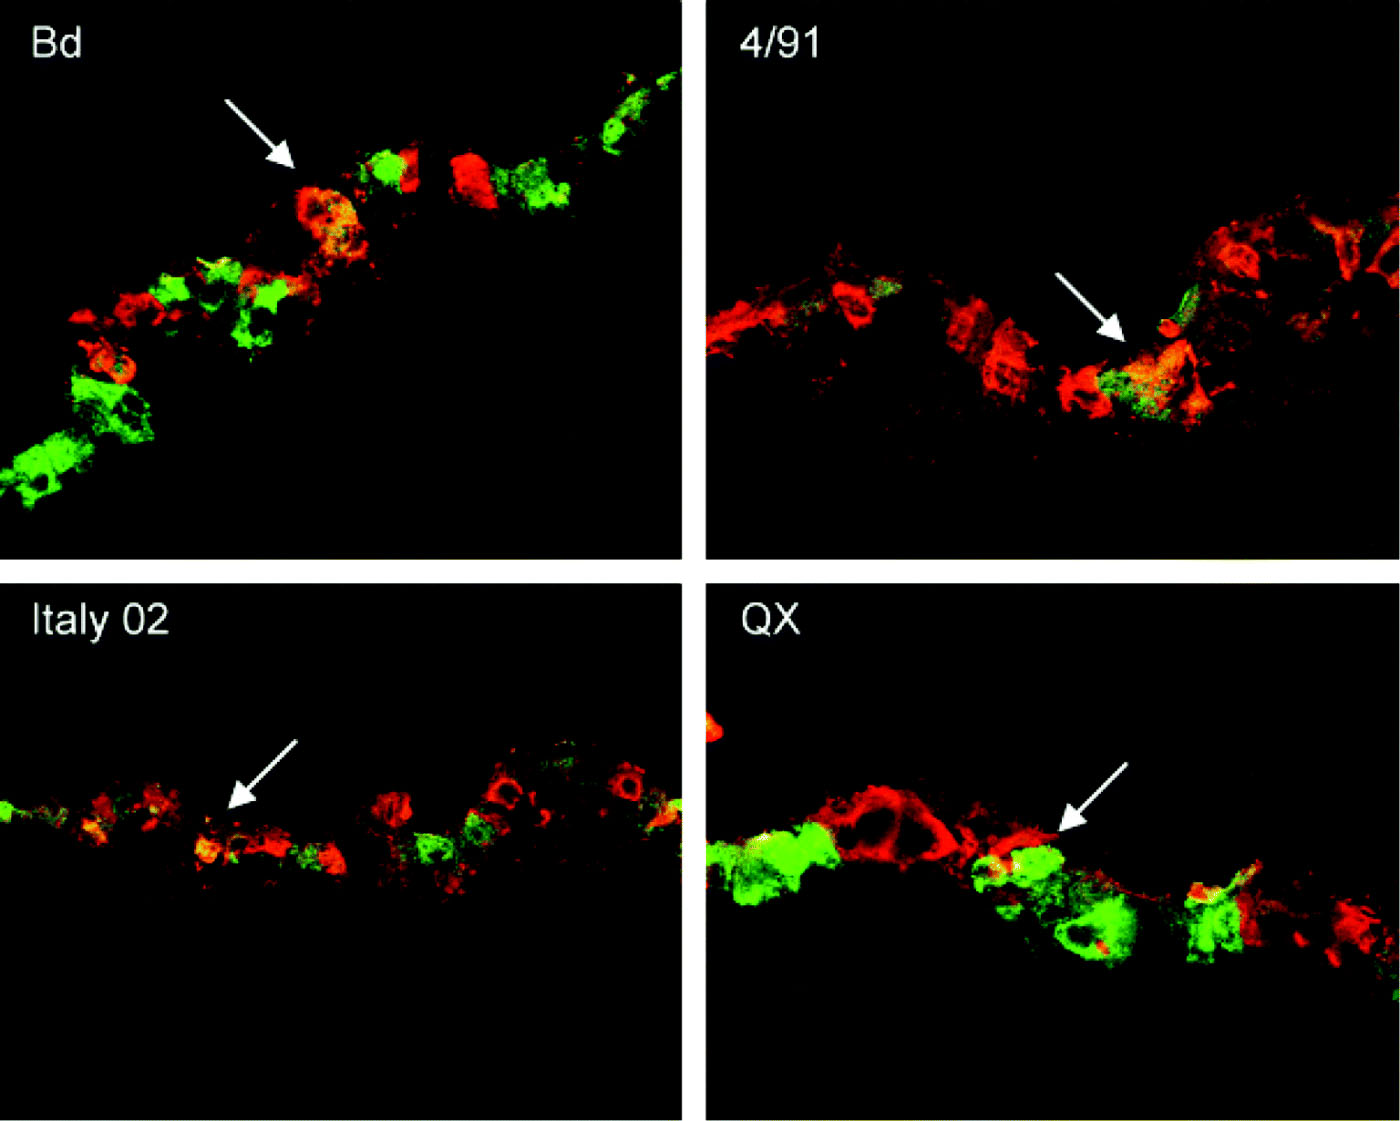 Figure 4.  Immunofluorescence analysis of cryosections prepared from IBV-infected tracheal organ cultures. At 24 h post inoculation, sections were stained for goblet cells using an anti-Muc5AC antibody (red) and for virus antigen using a polyclonal IBV serum (green). Areas of co-staining are indicated by white arrows. Bd, Beaudette.